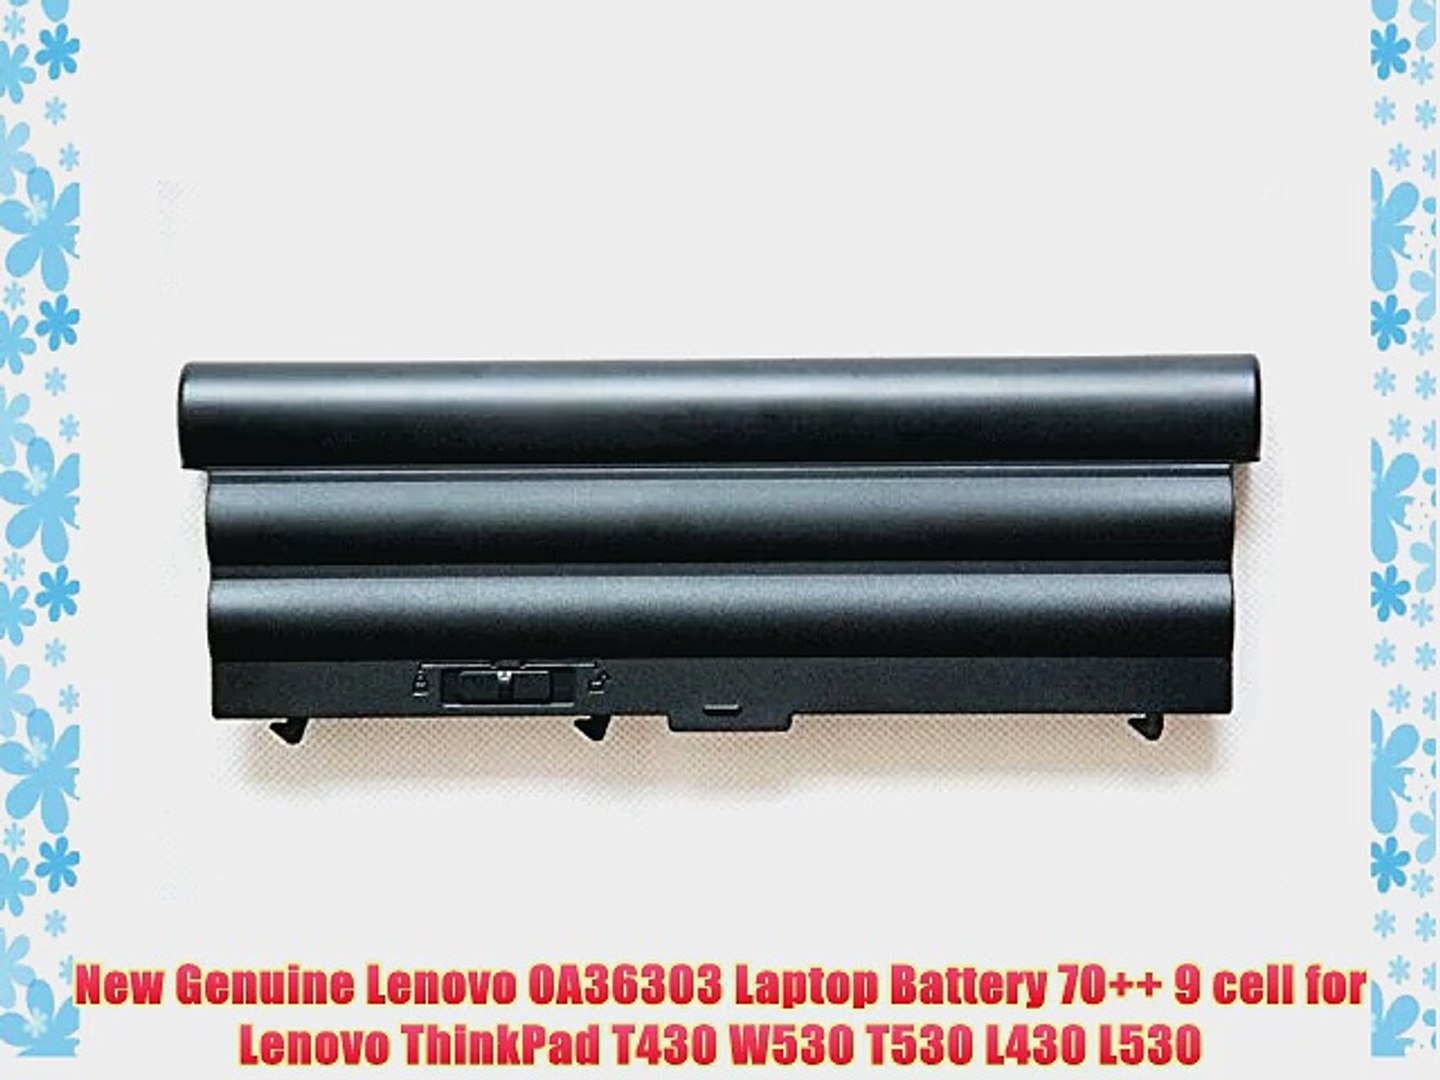 New Genuine Lenovo 0A36303 Laptop Battery 70 9 cell for Lenovo ThinkPad T430  W530 T530 L430 - video Dailymotion